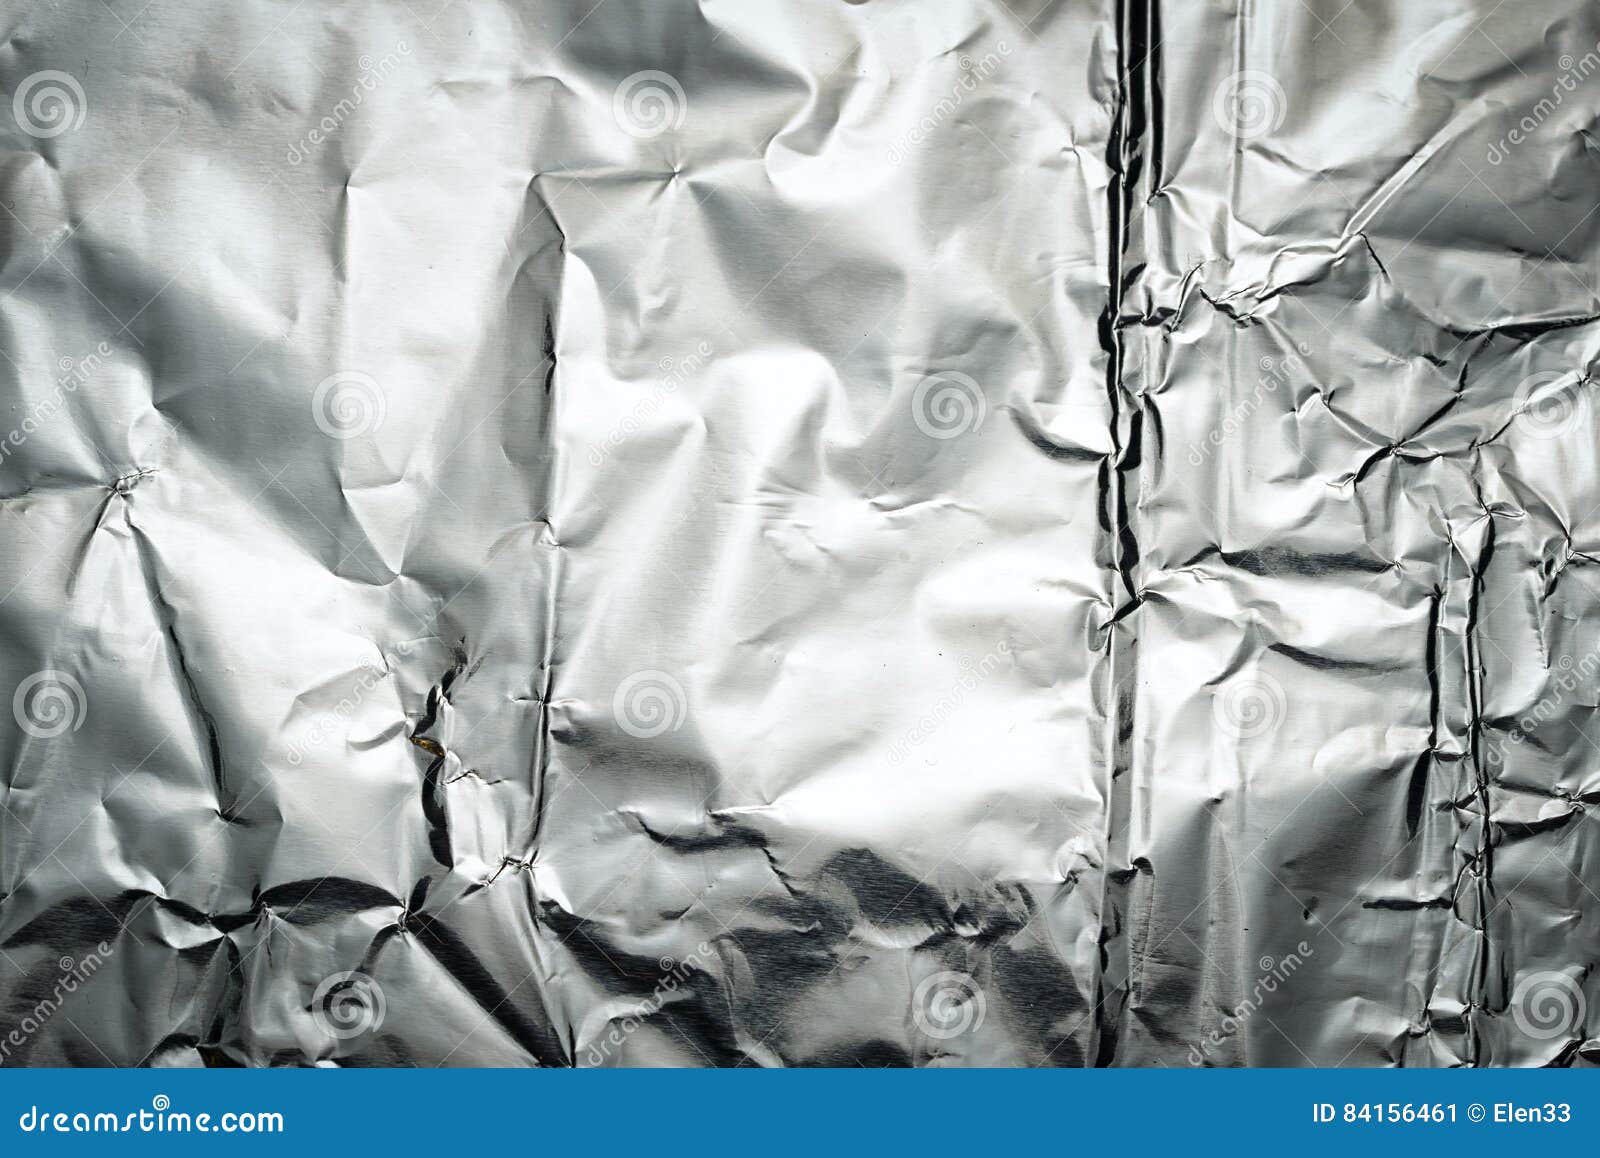 https://thumbs.dreamstime.com/z/foil-crushed-tinfoil-as-textured-background-84156461.jpg